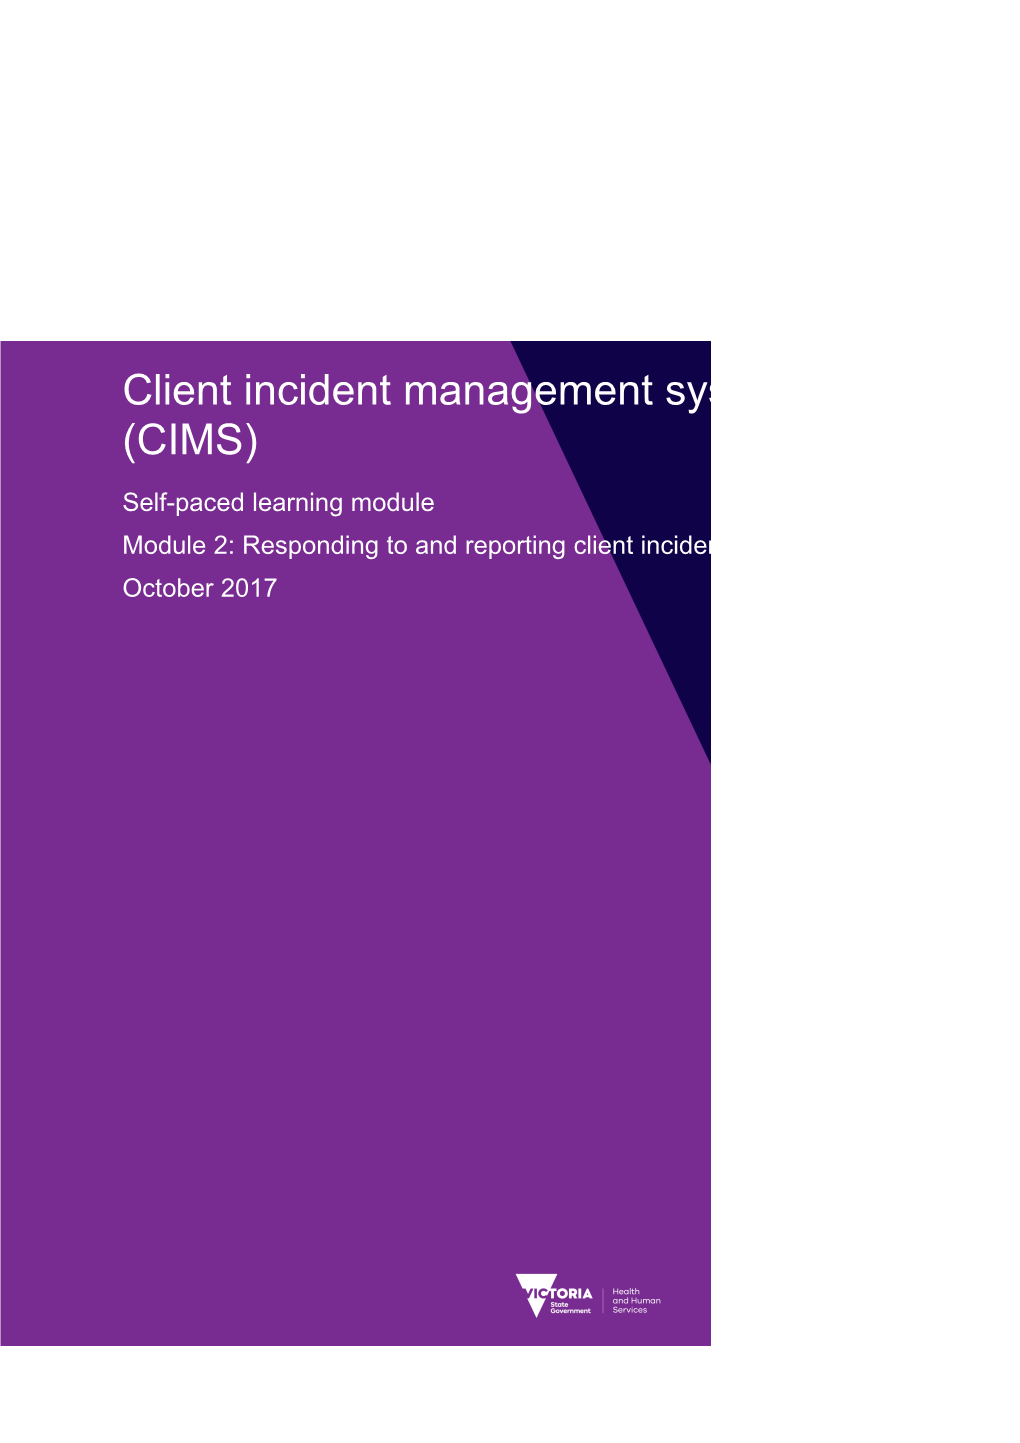 CIMS Learning Module 2 Responding to and Reporting Client Incidents